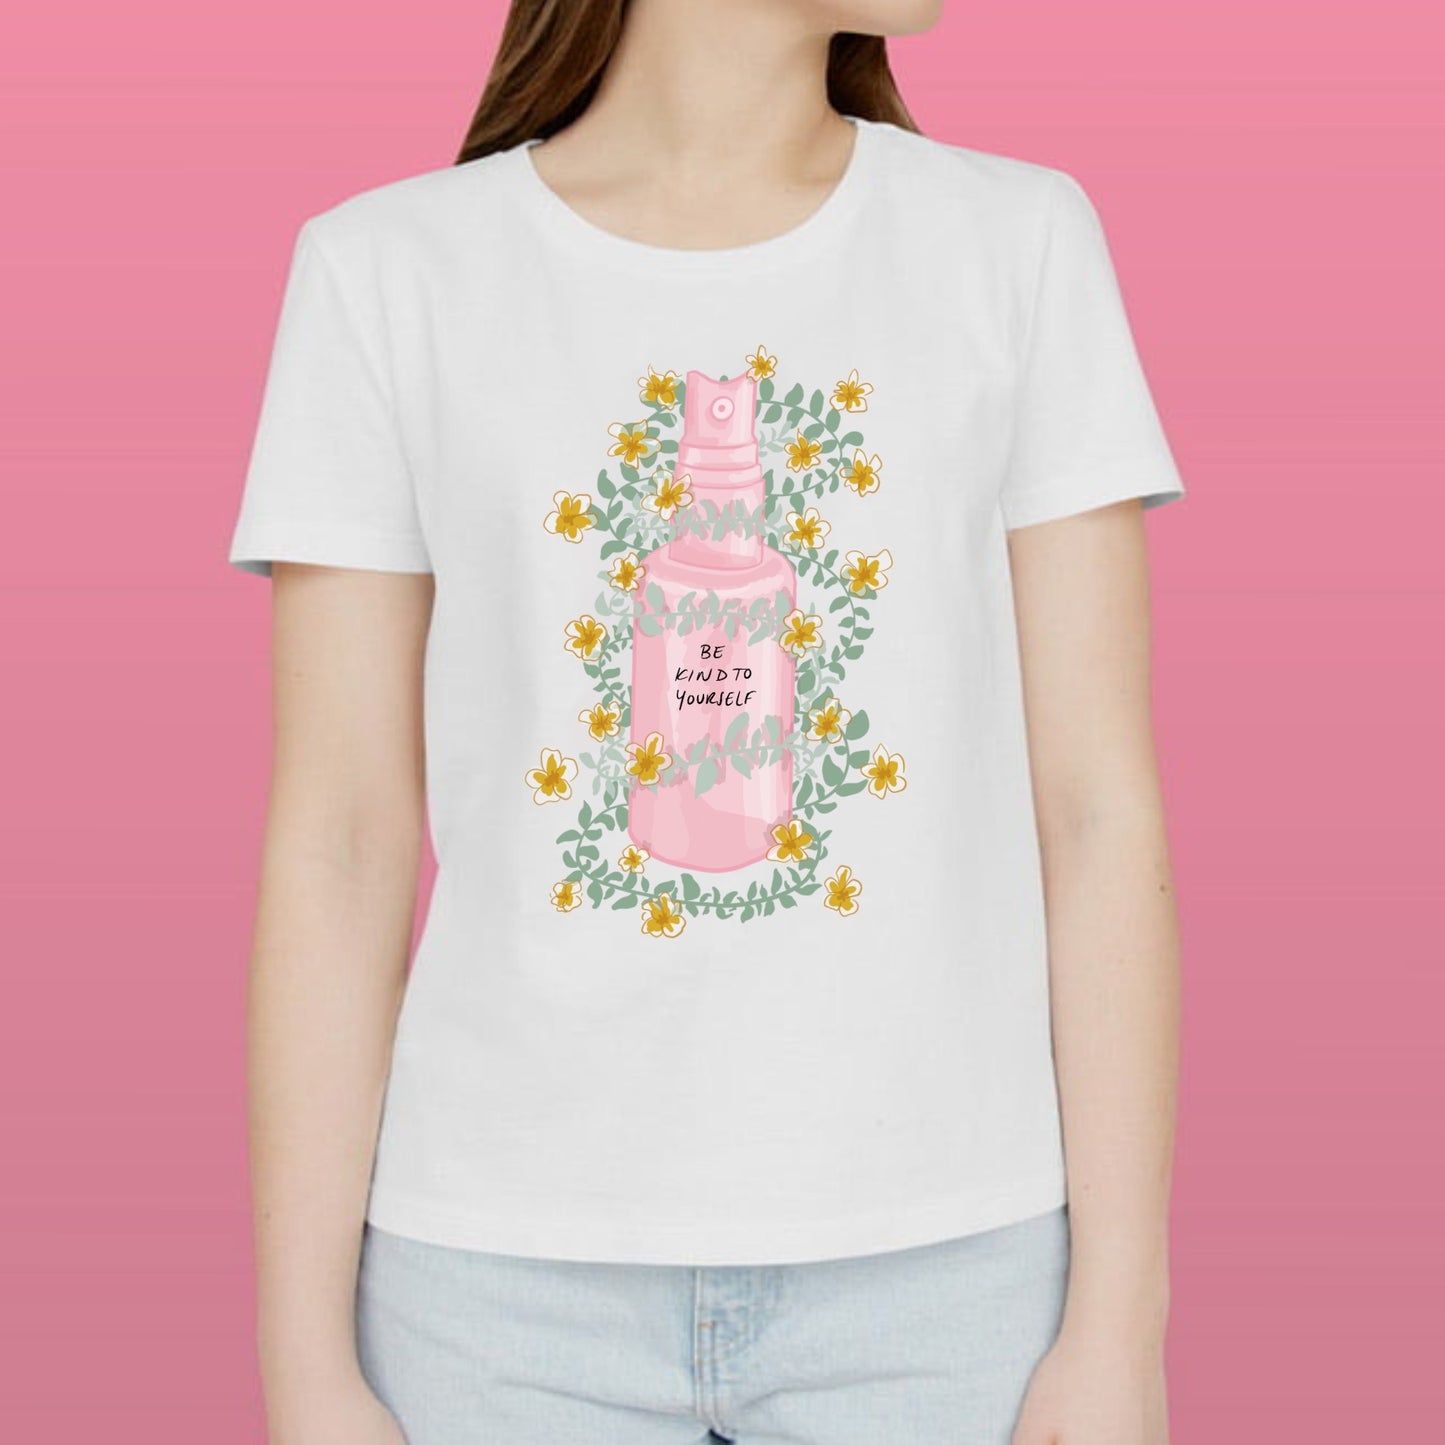 Be Kind to Yourself Floral T-Shirt